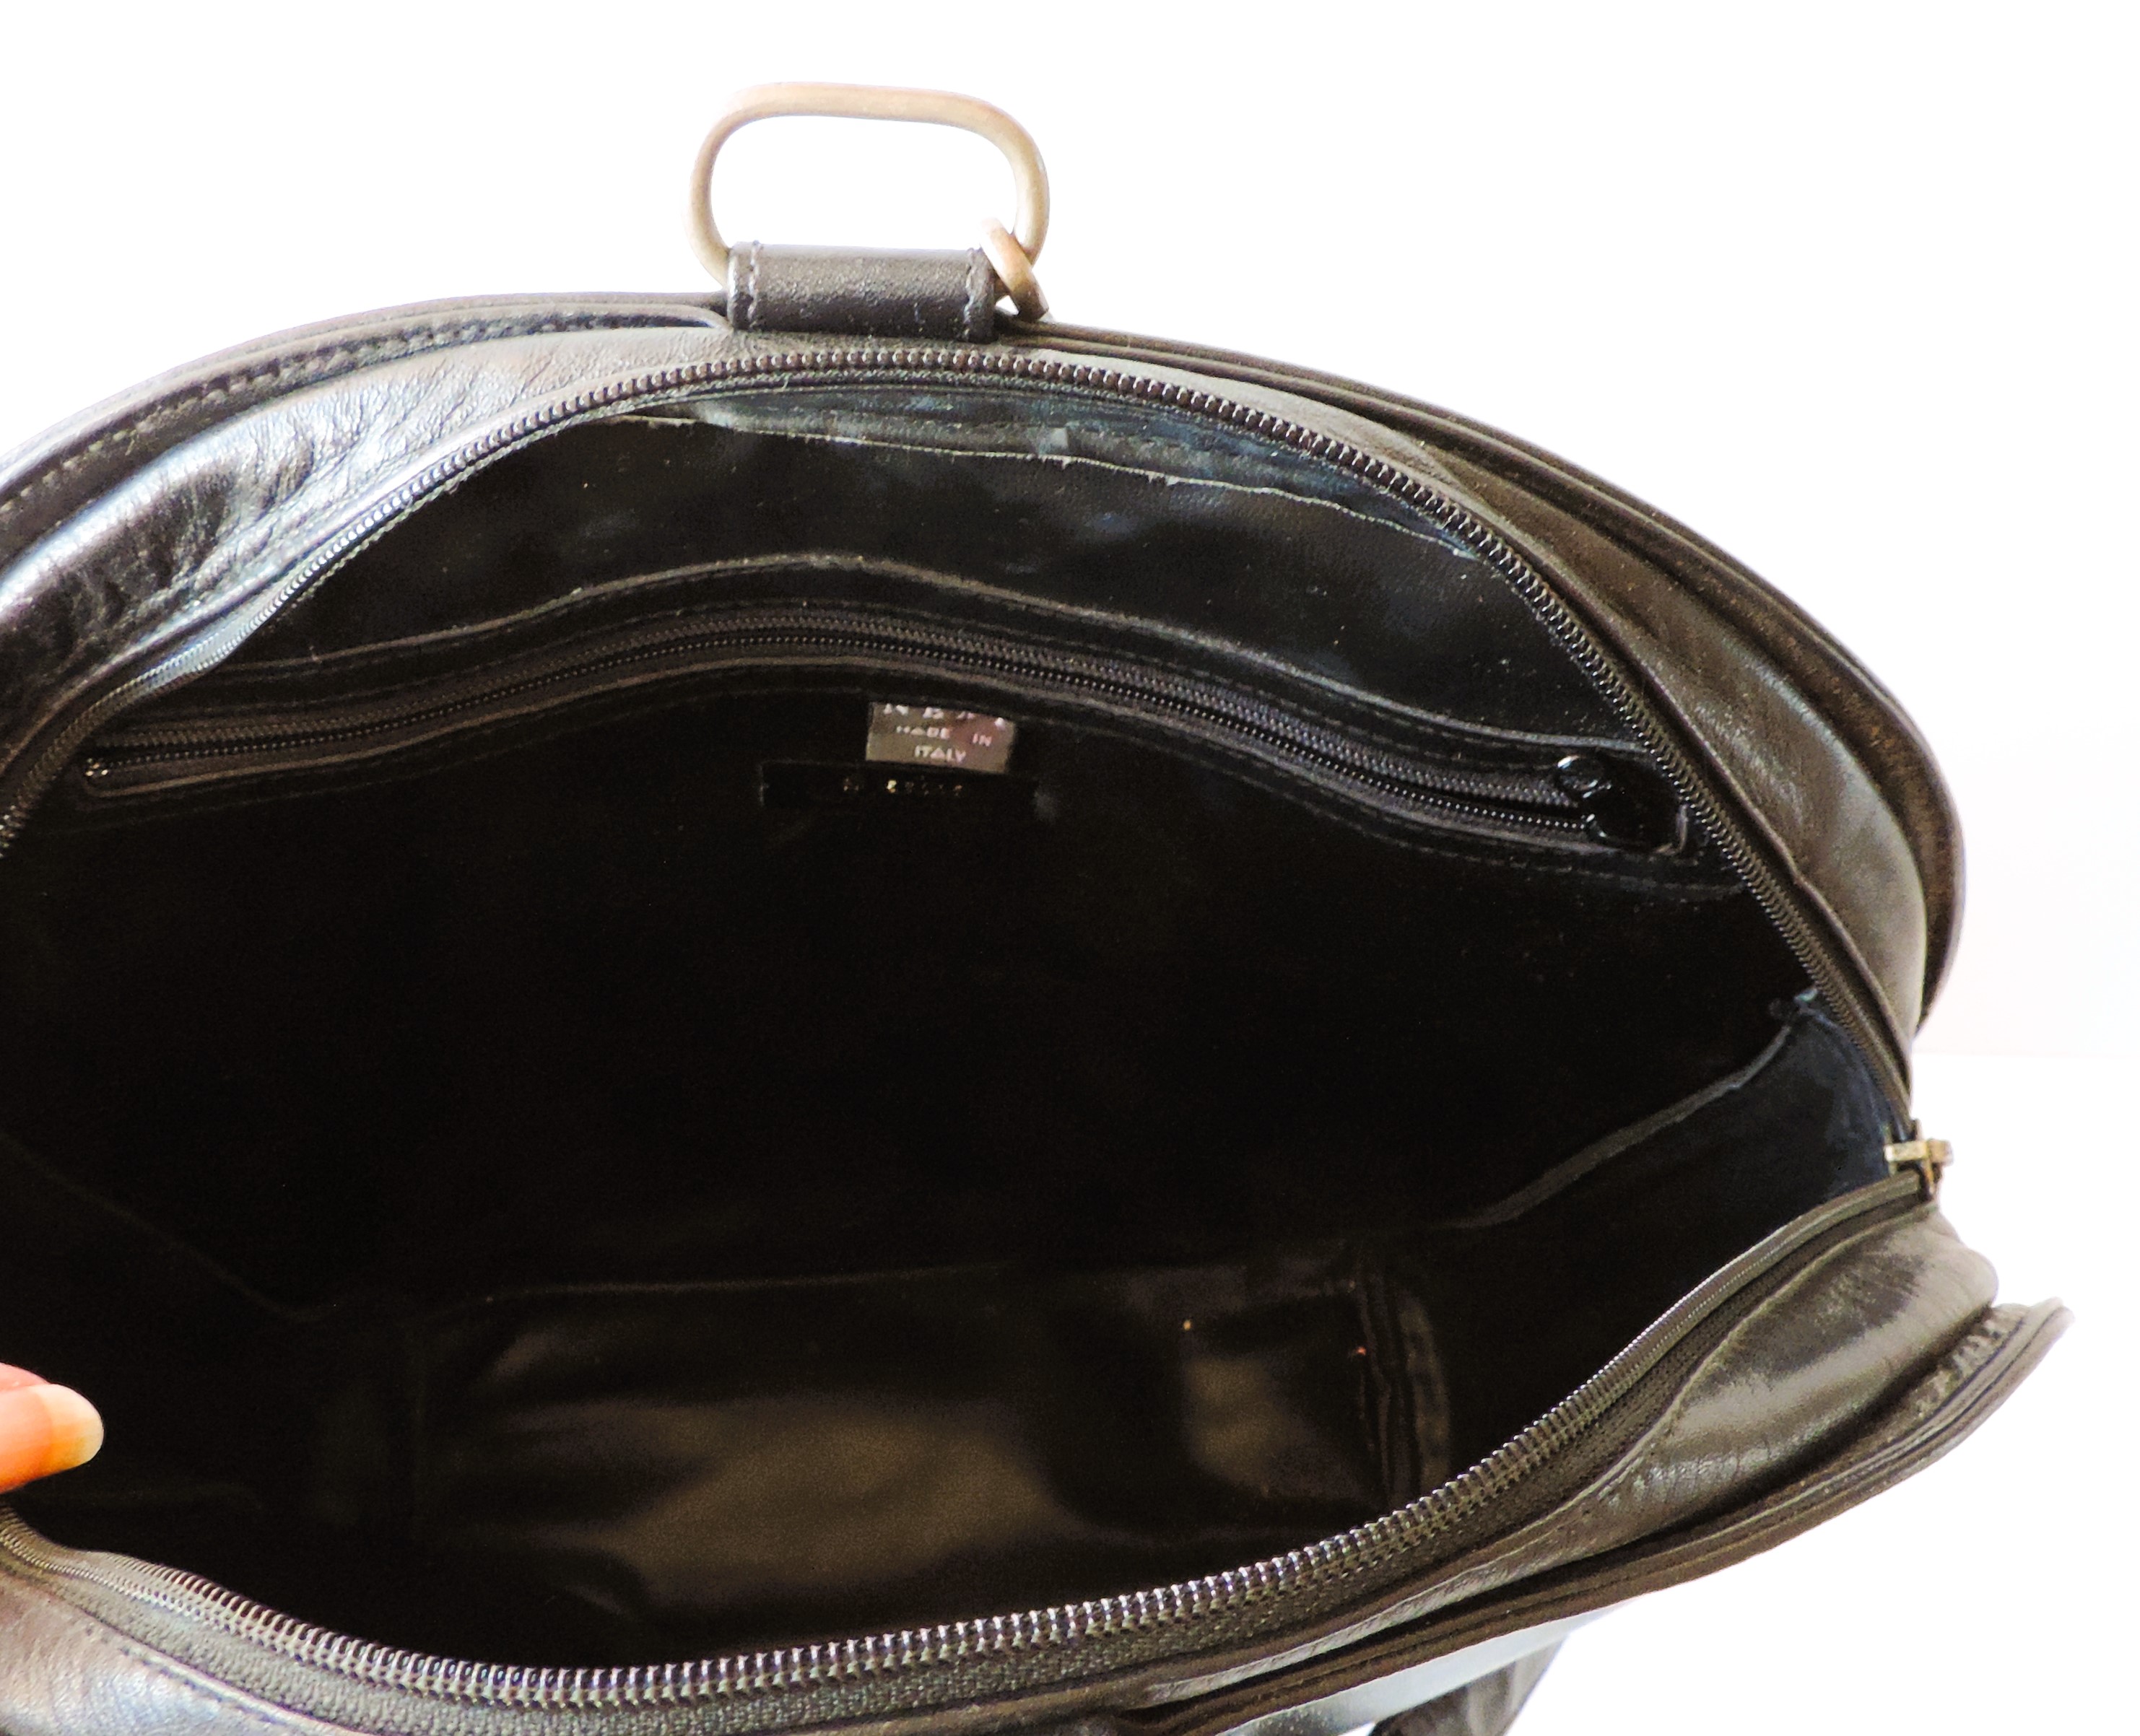 Made in Italy Black Leather Bag - Image 5 of 8